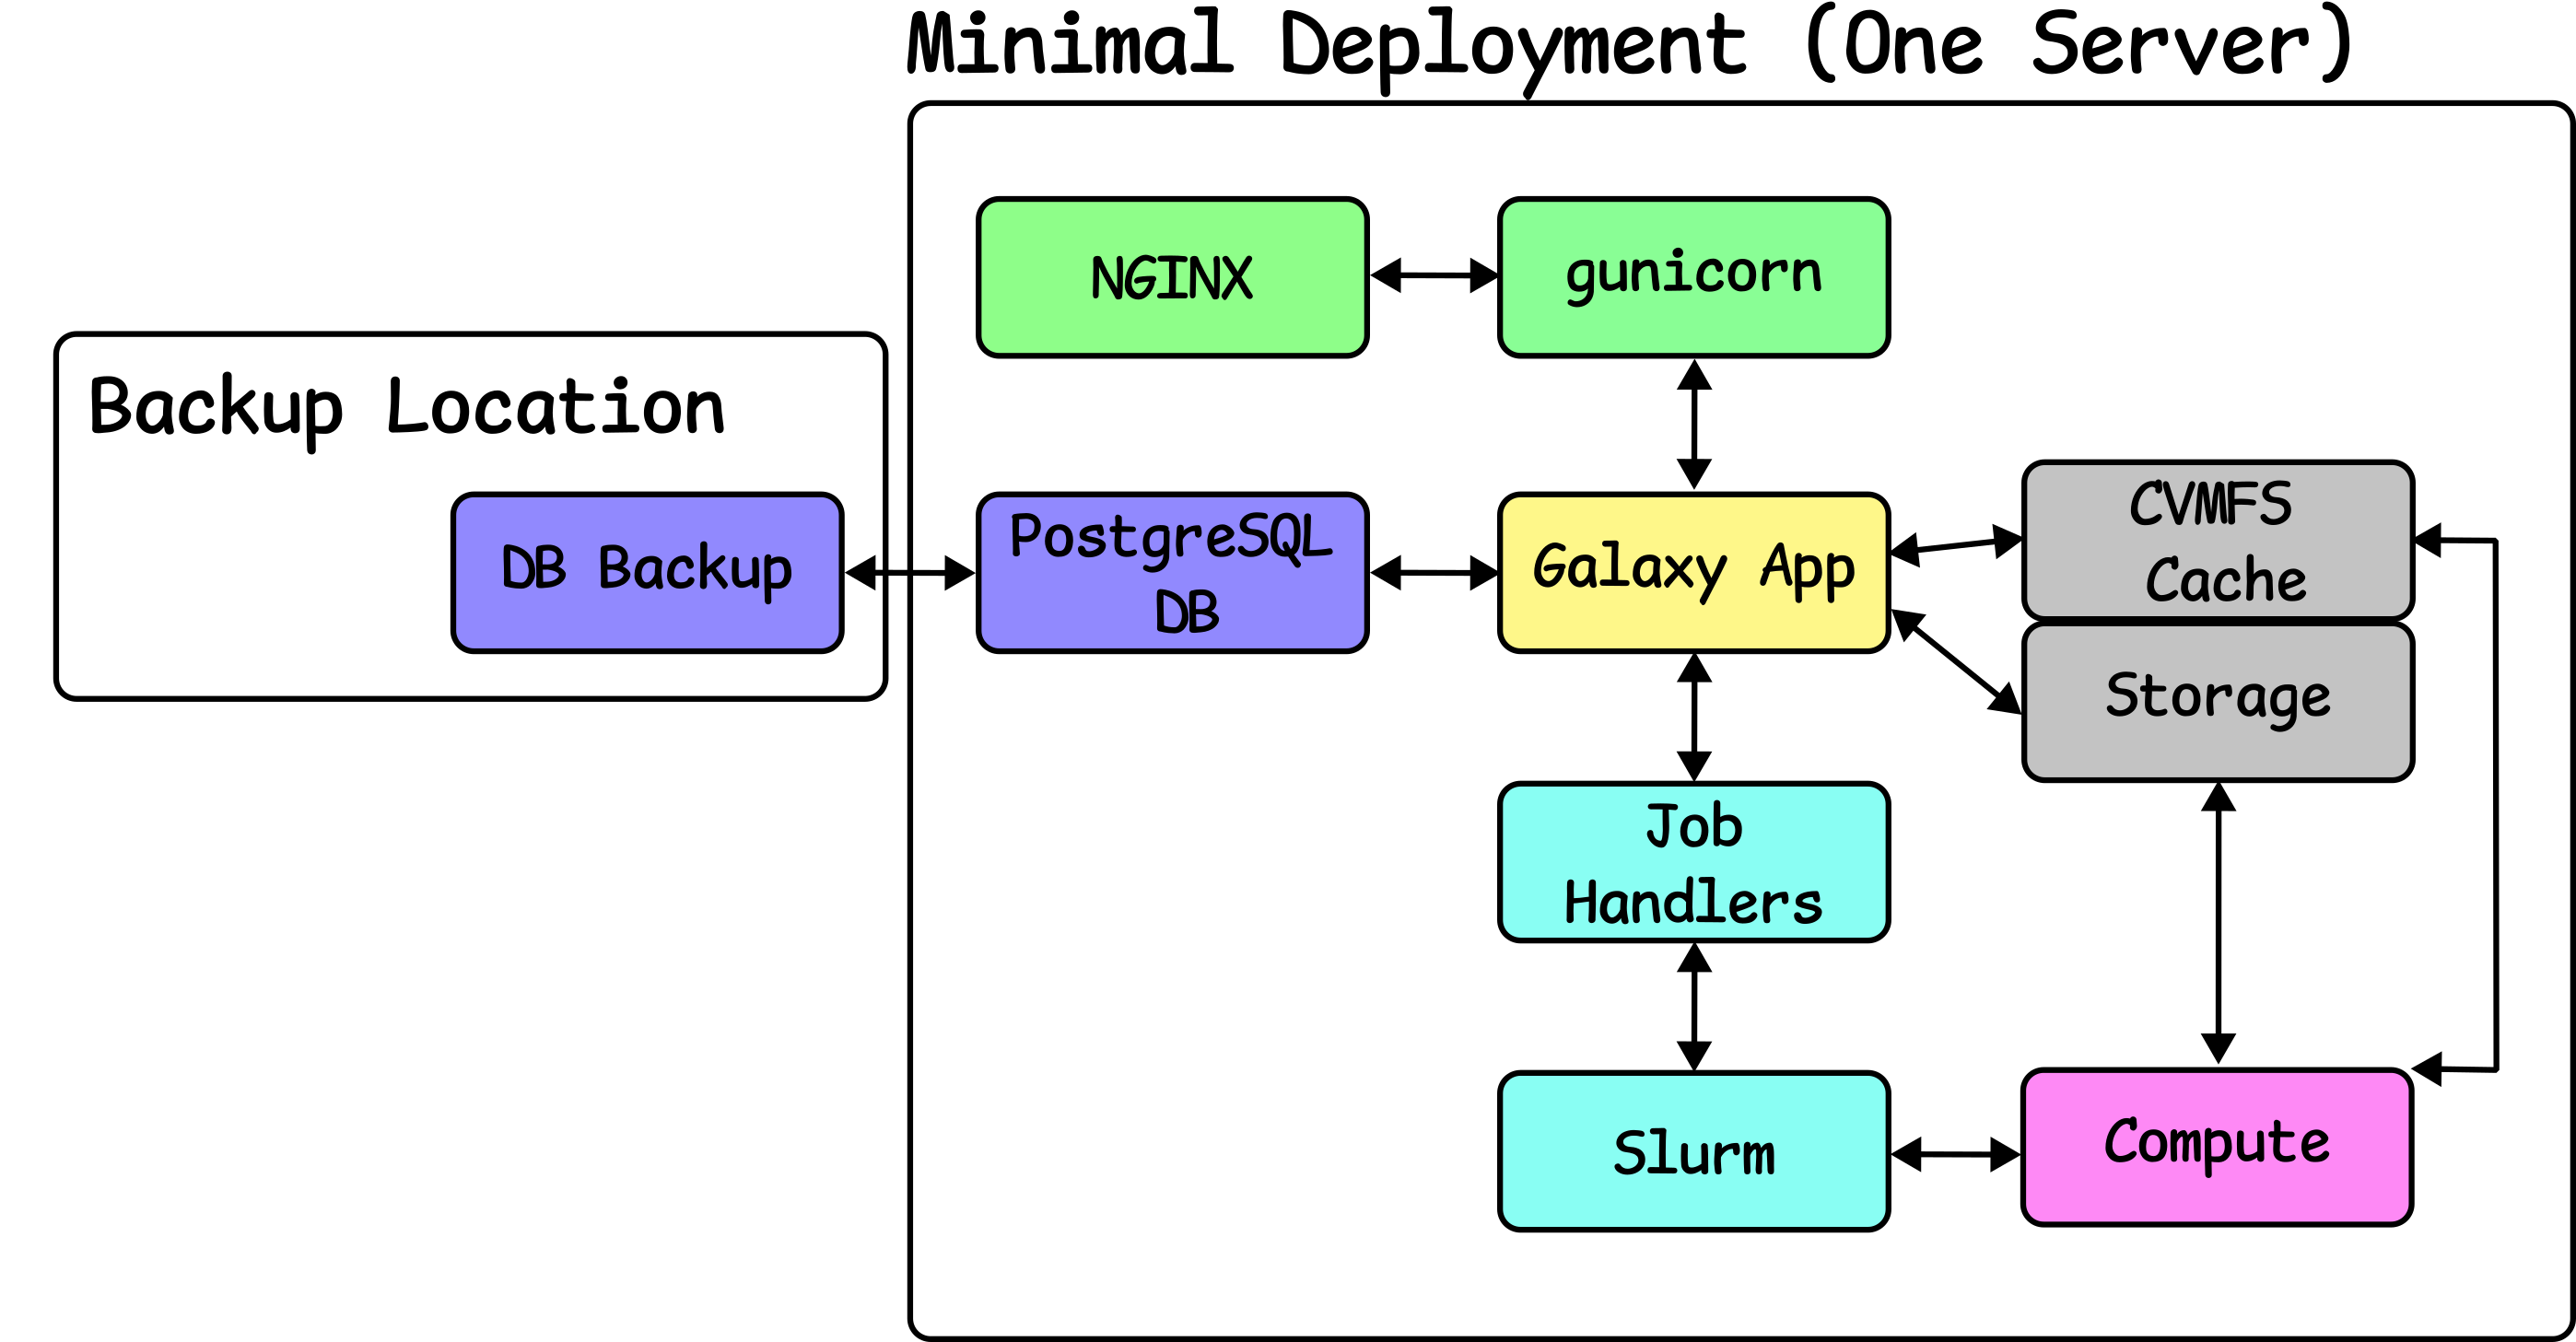 Job Handlers are added, connected to Galaxy. This connects to a Slurm deployment which is connected to a compute node which points to storage and cvmfs